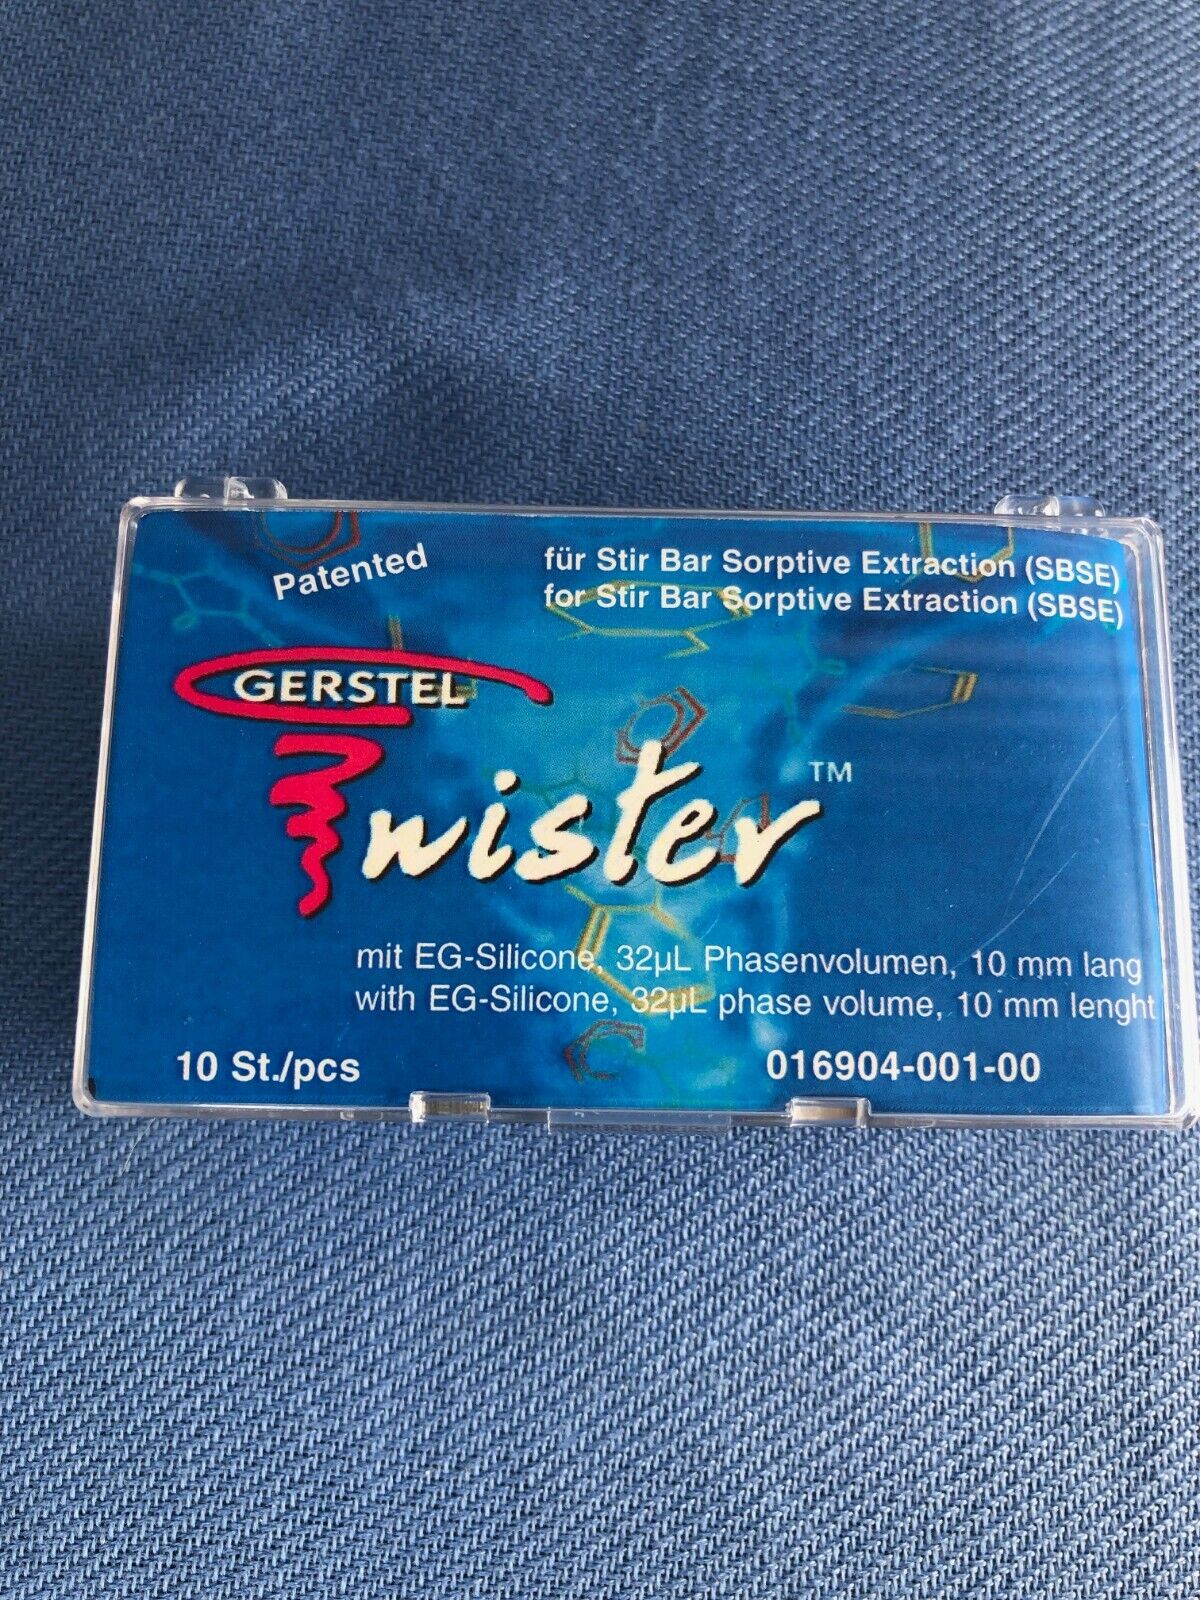 Gerstel Twister for stir bar sorptive extraction (SBSE) with EG-Silicone